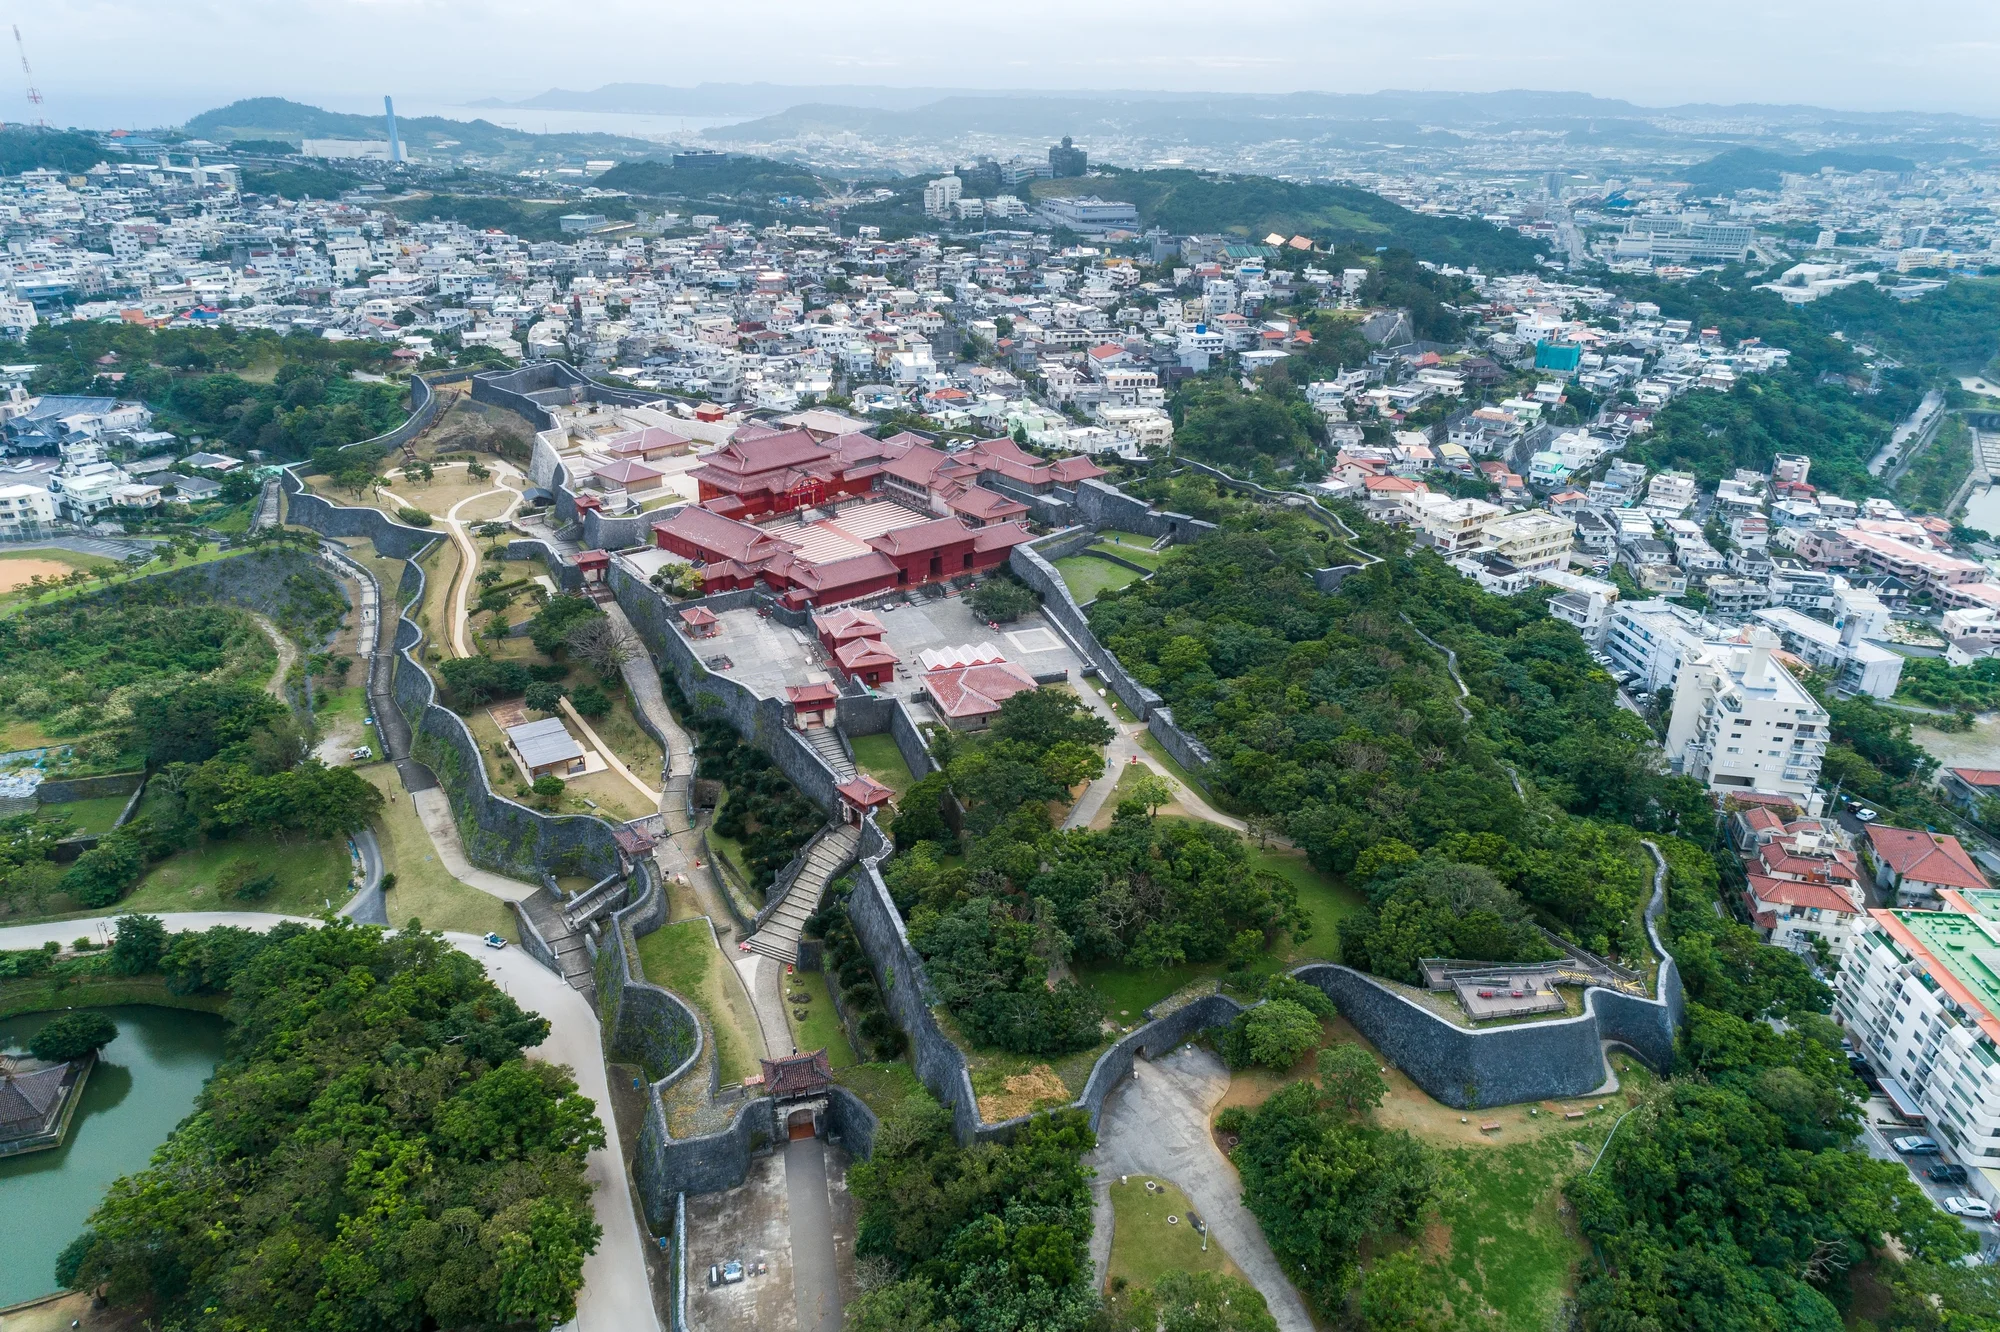 Shuri Castle from above